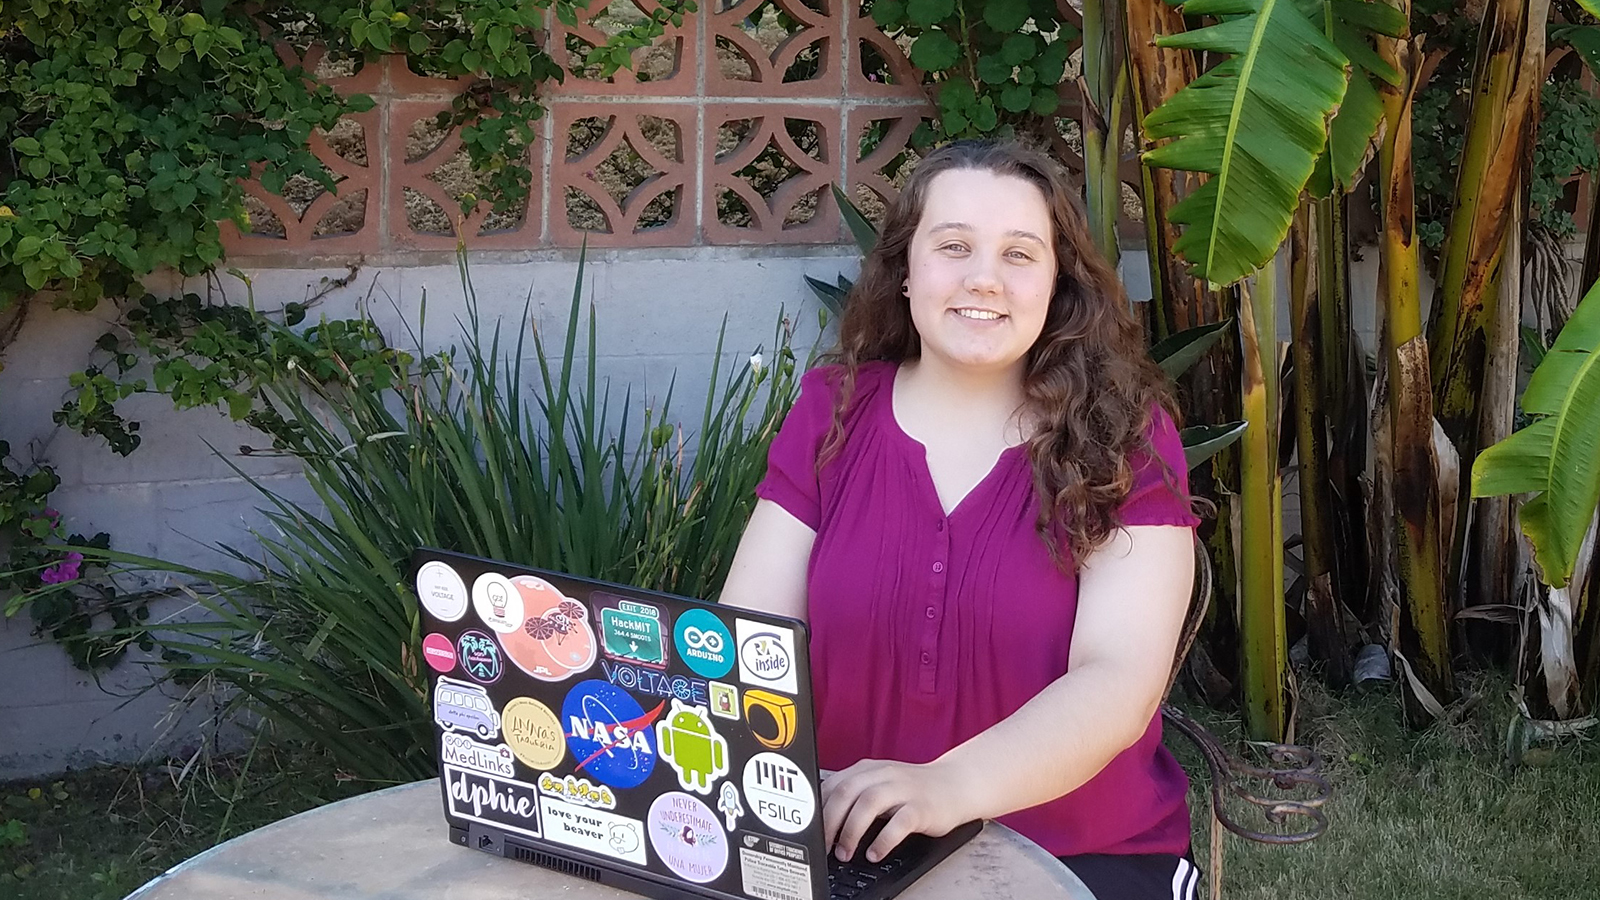 Leilani Trautman poses for a photo at an outside table. The back of her open laptop has dozens of stickers attached to it, including a NASA meatball.